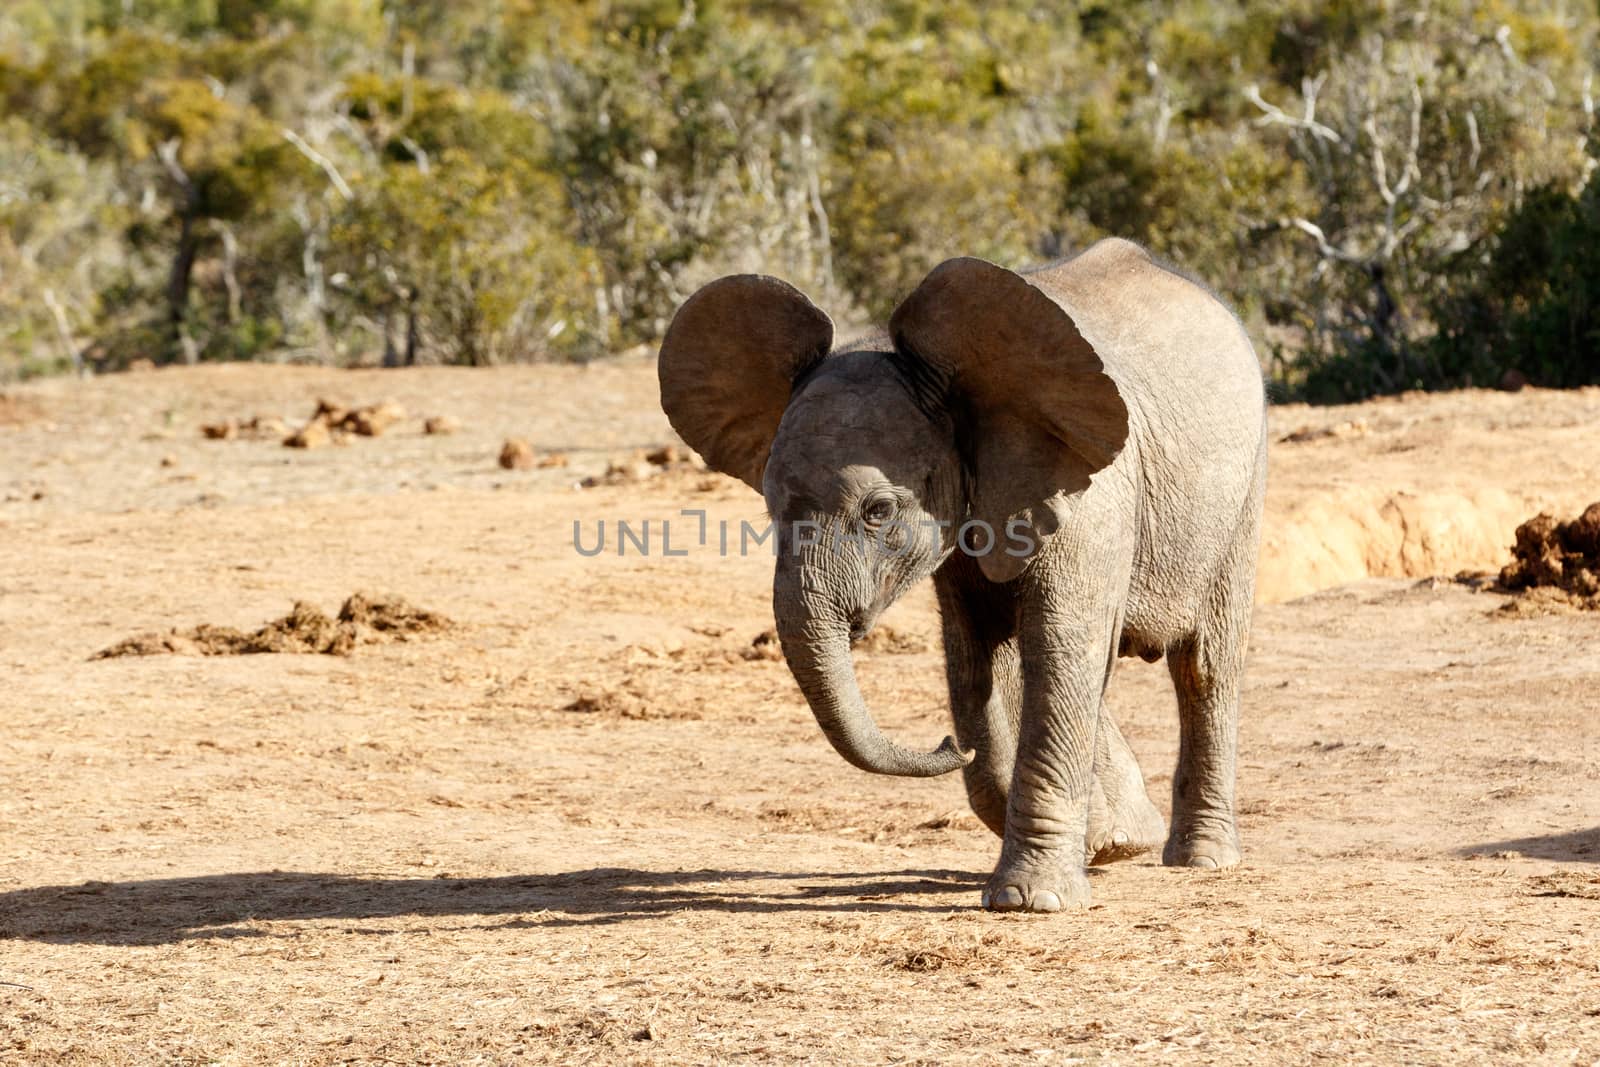 African Bush Elephant with Huge Ears  - The African bush elephant is the larger of the two species of African elephant. Both it and the African forest elephant have in the past been classified as a single species.